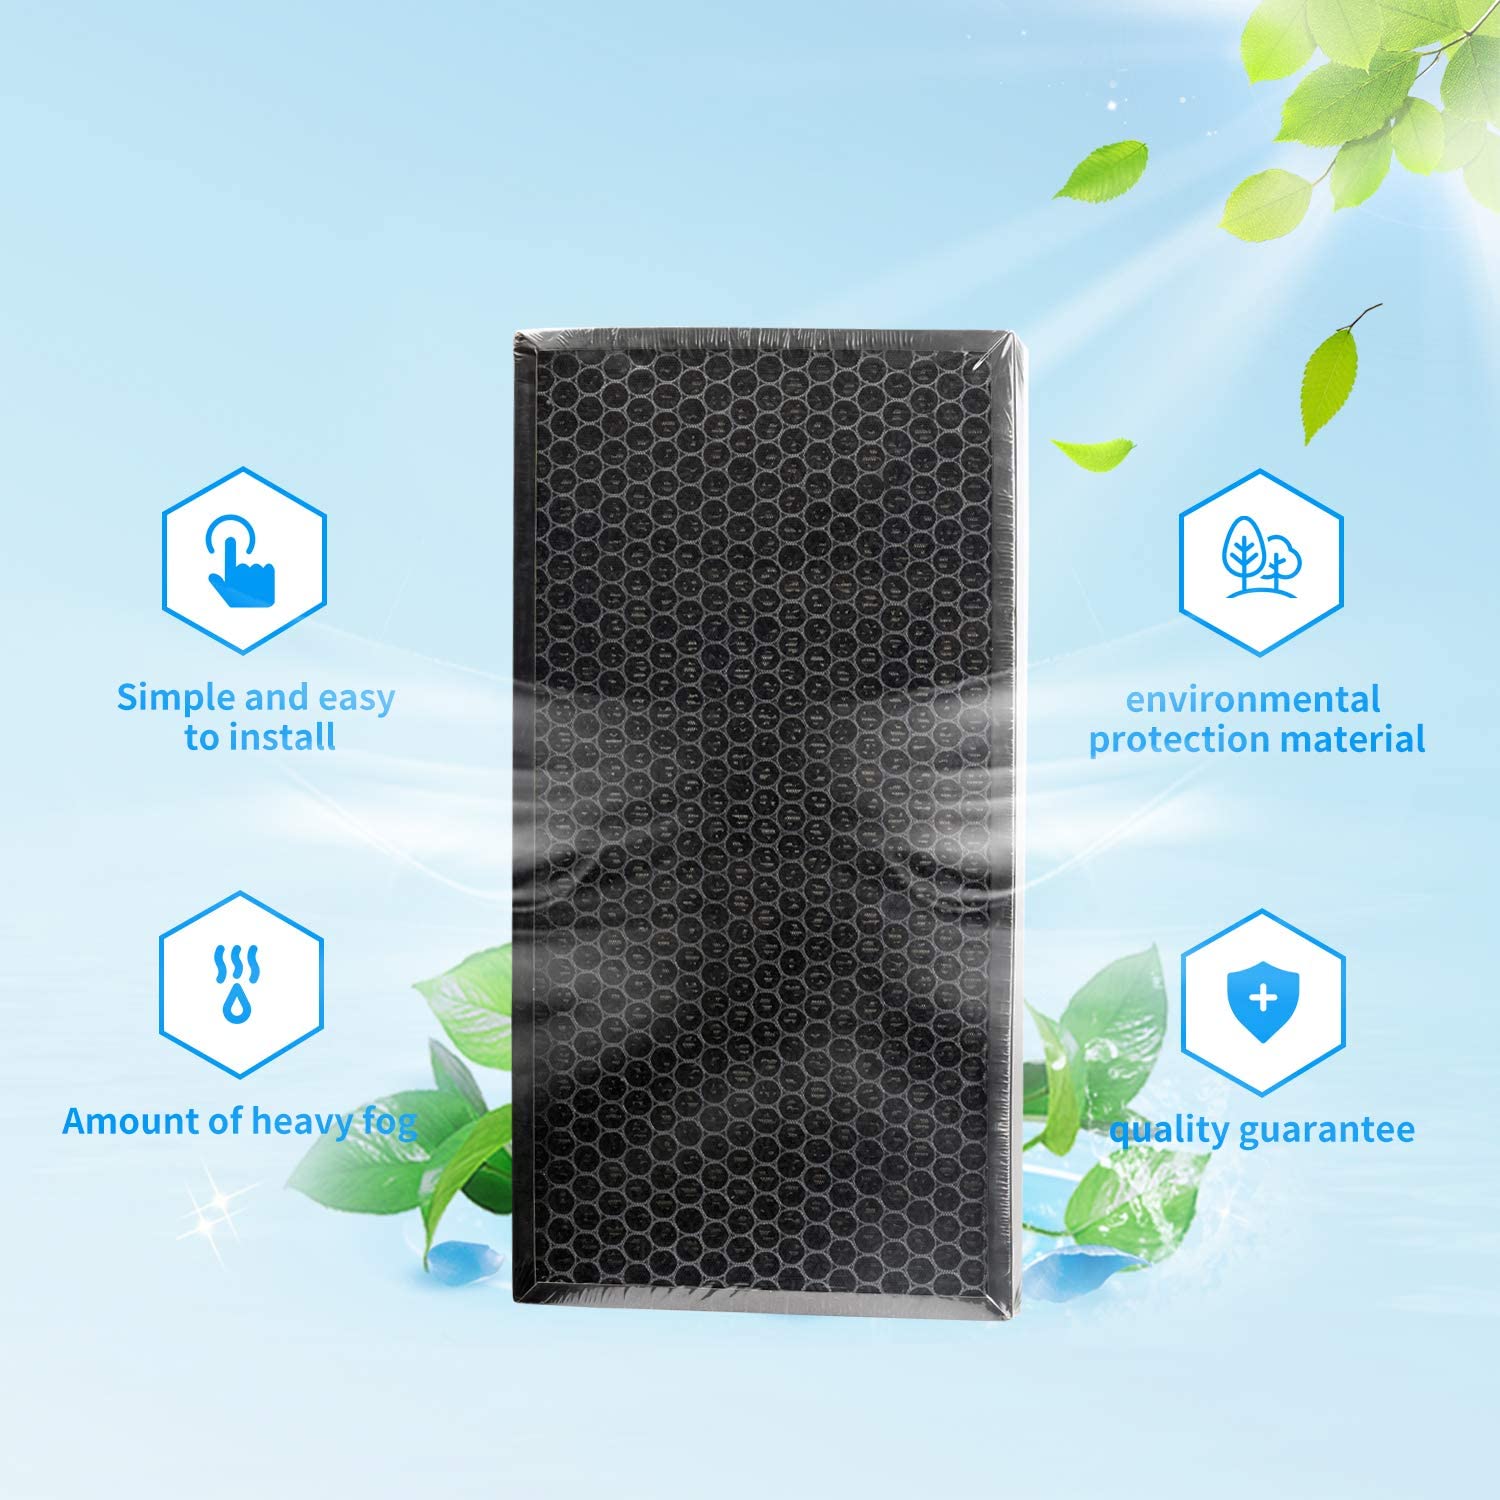 ROVACS Air Purifier RV550 Filter (2 pcs), High efficiency H13 particulate air filter and activated carbon sponge, lasts over 3000 hours, captures more than 99.97% of particles with a diameter greater than or equal to 0.3 microns